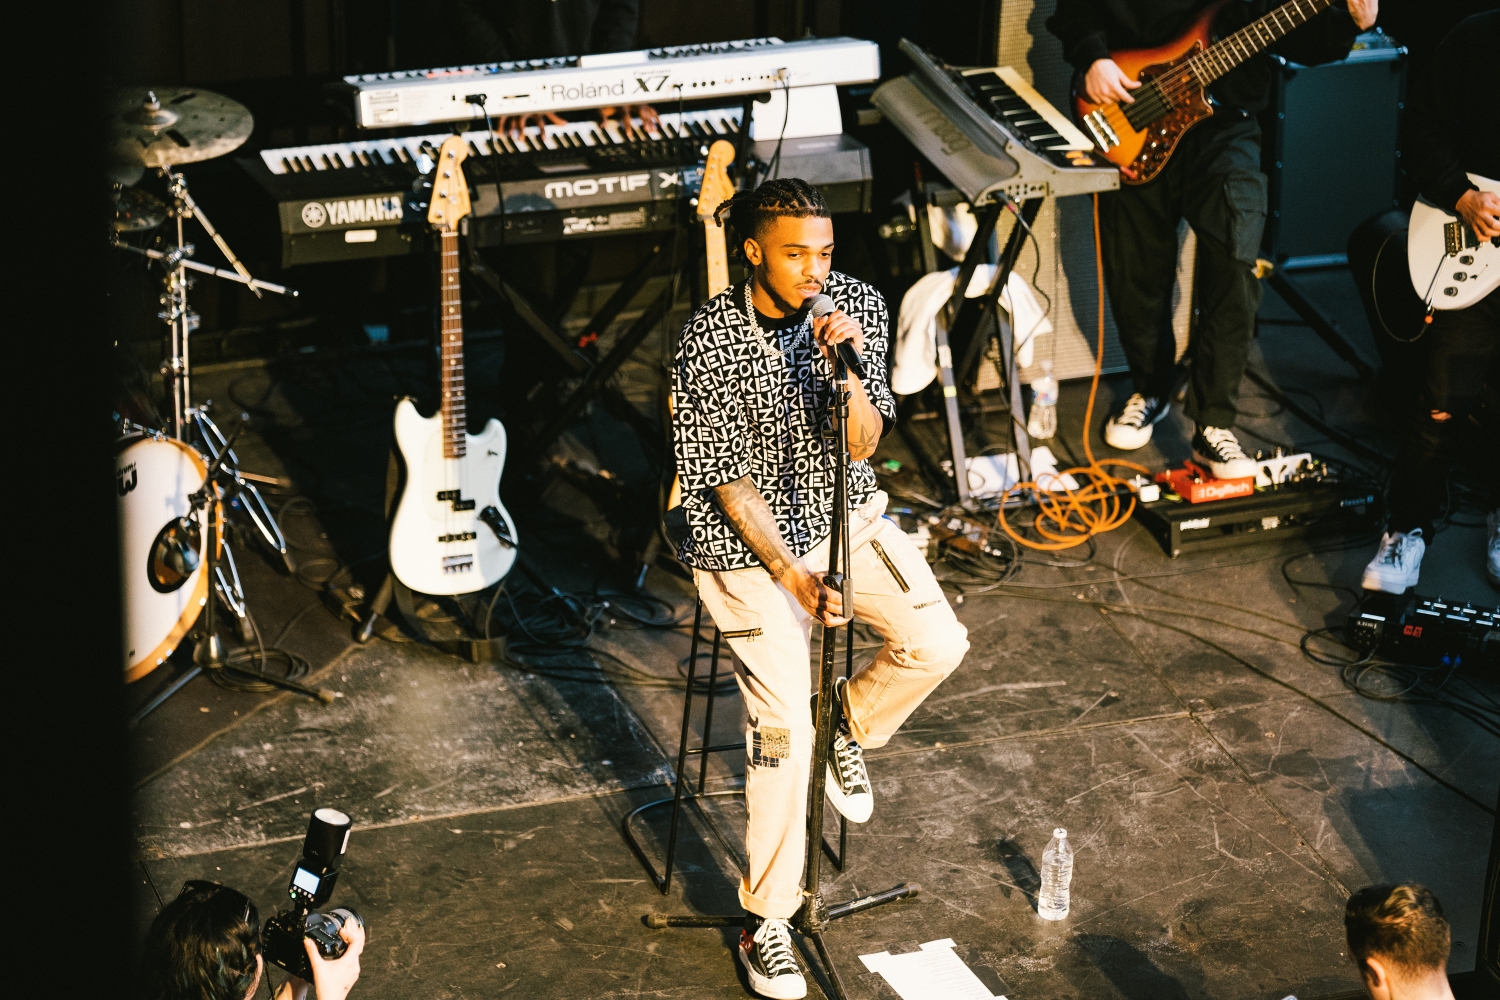 Tone Stith turns up the heat for an intimate SXSW performance at the Creator House 